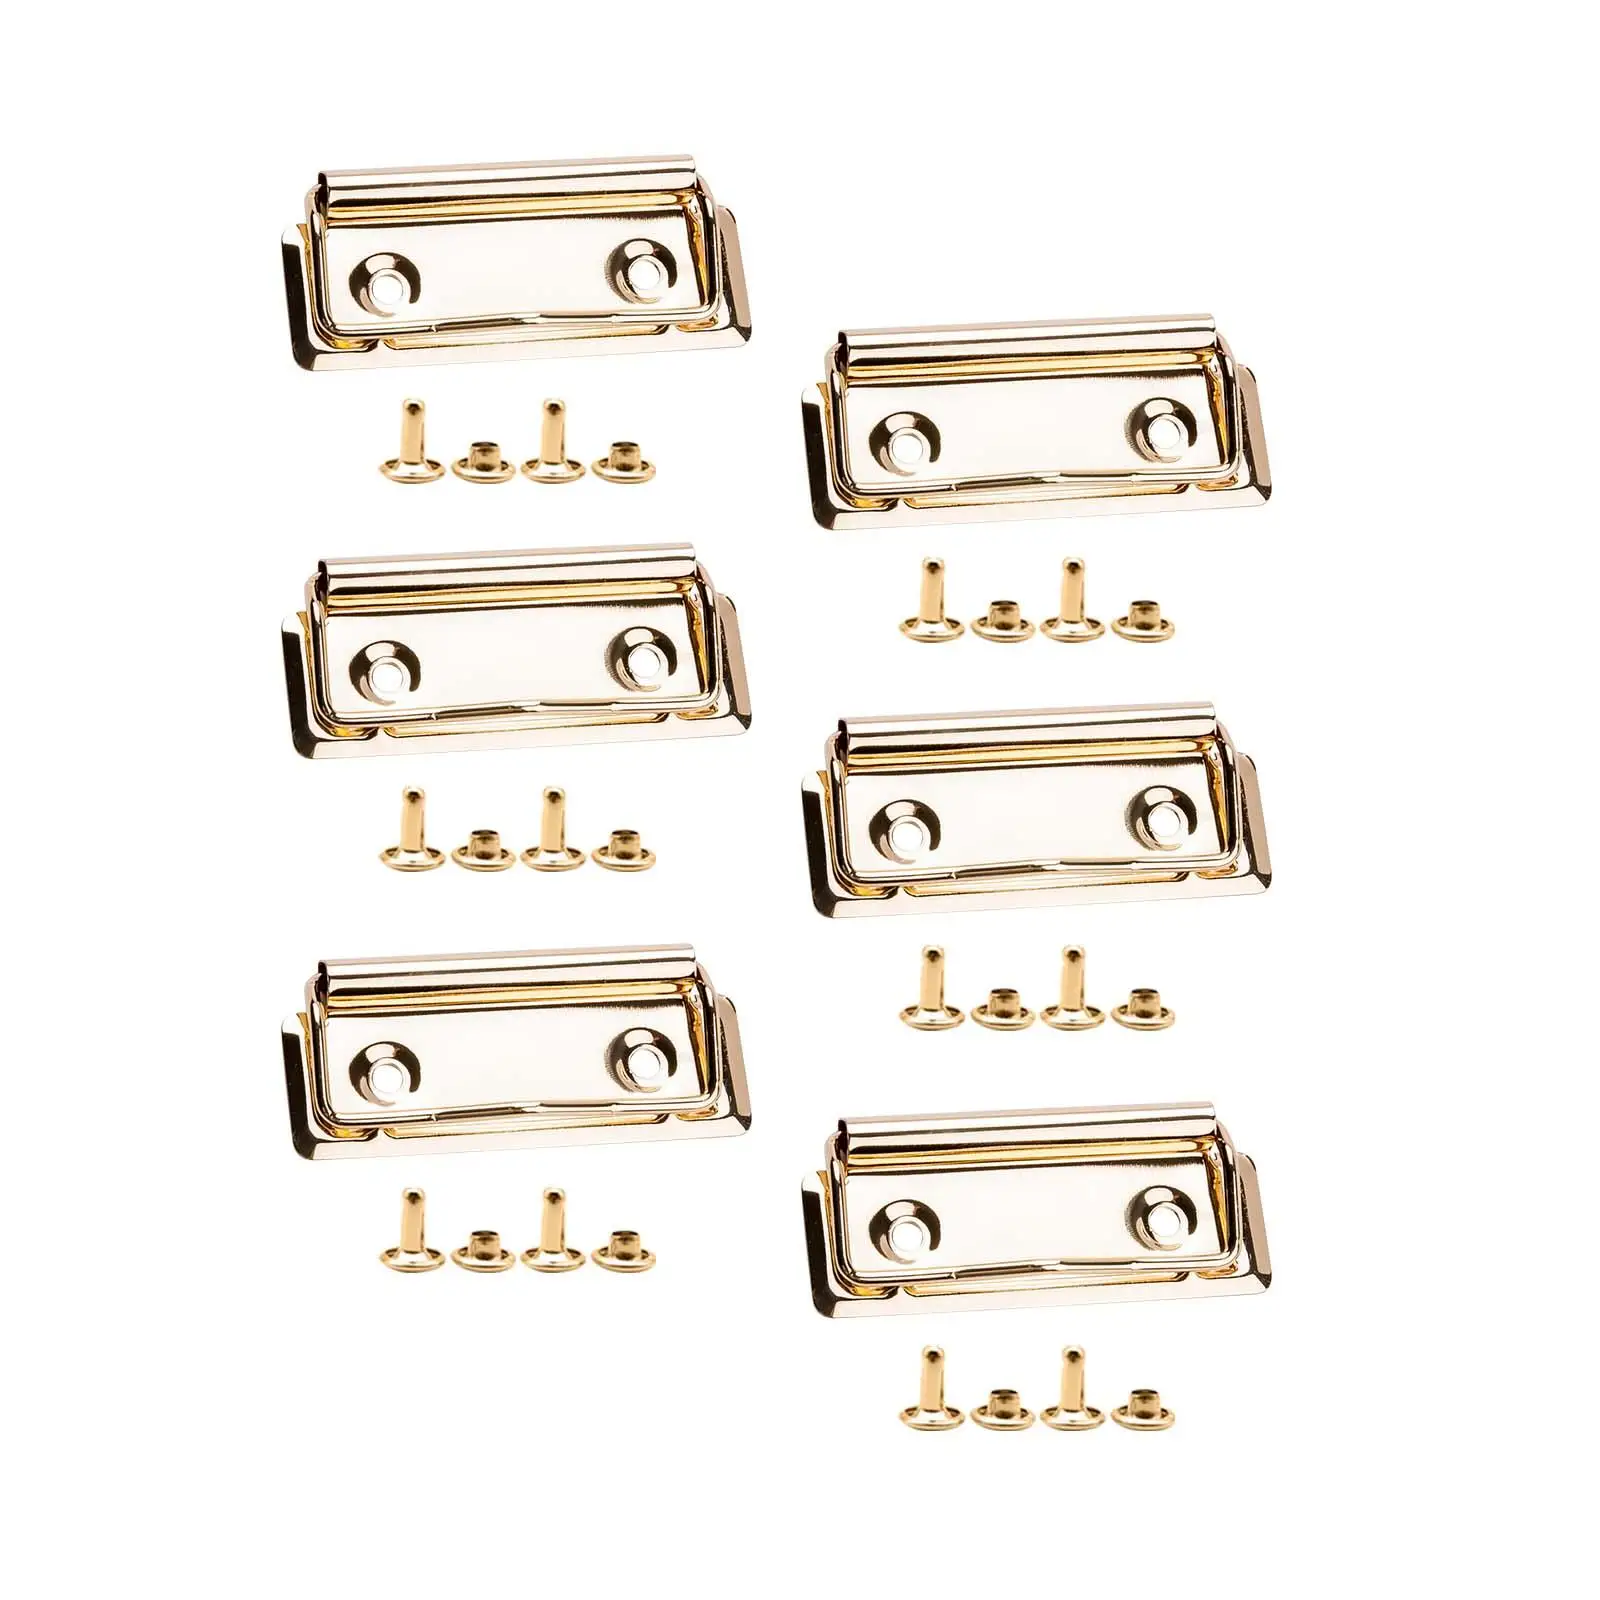 6Pcs Clips for Clipboard Metal Stationery Plate Holder Document File Board Clips for Office Stationery Supplies Business